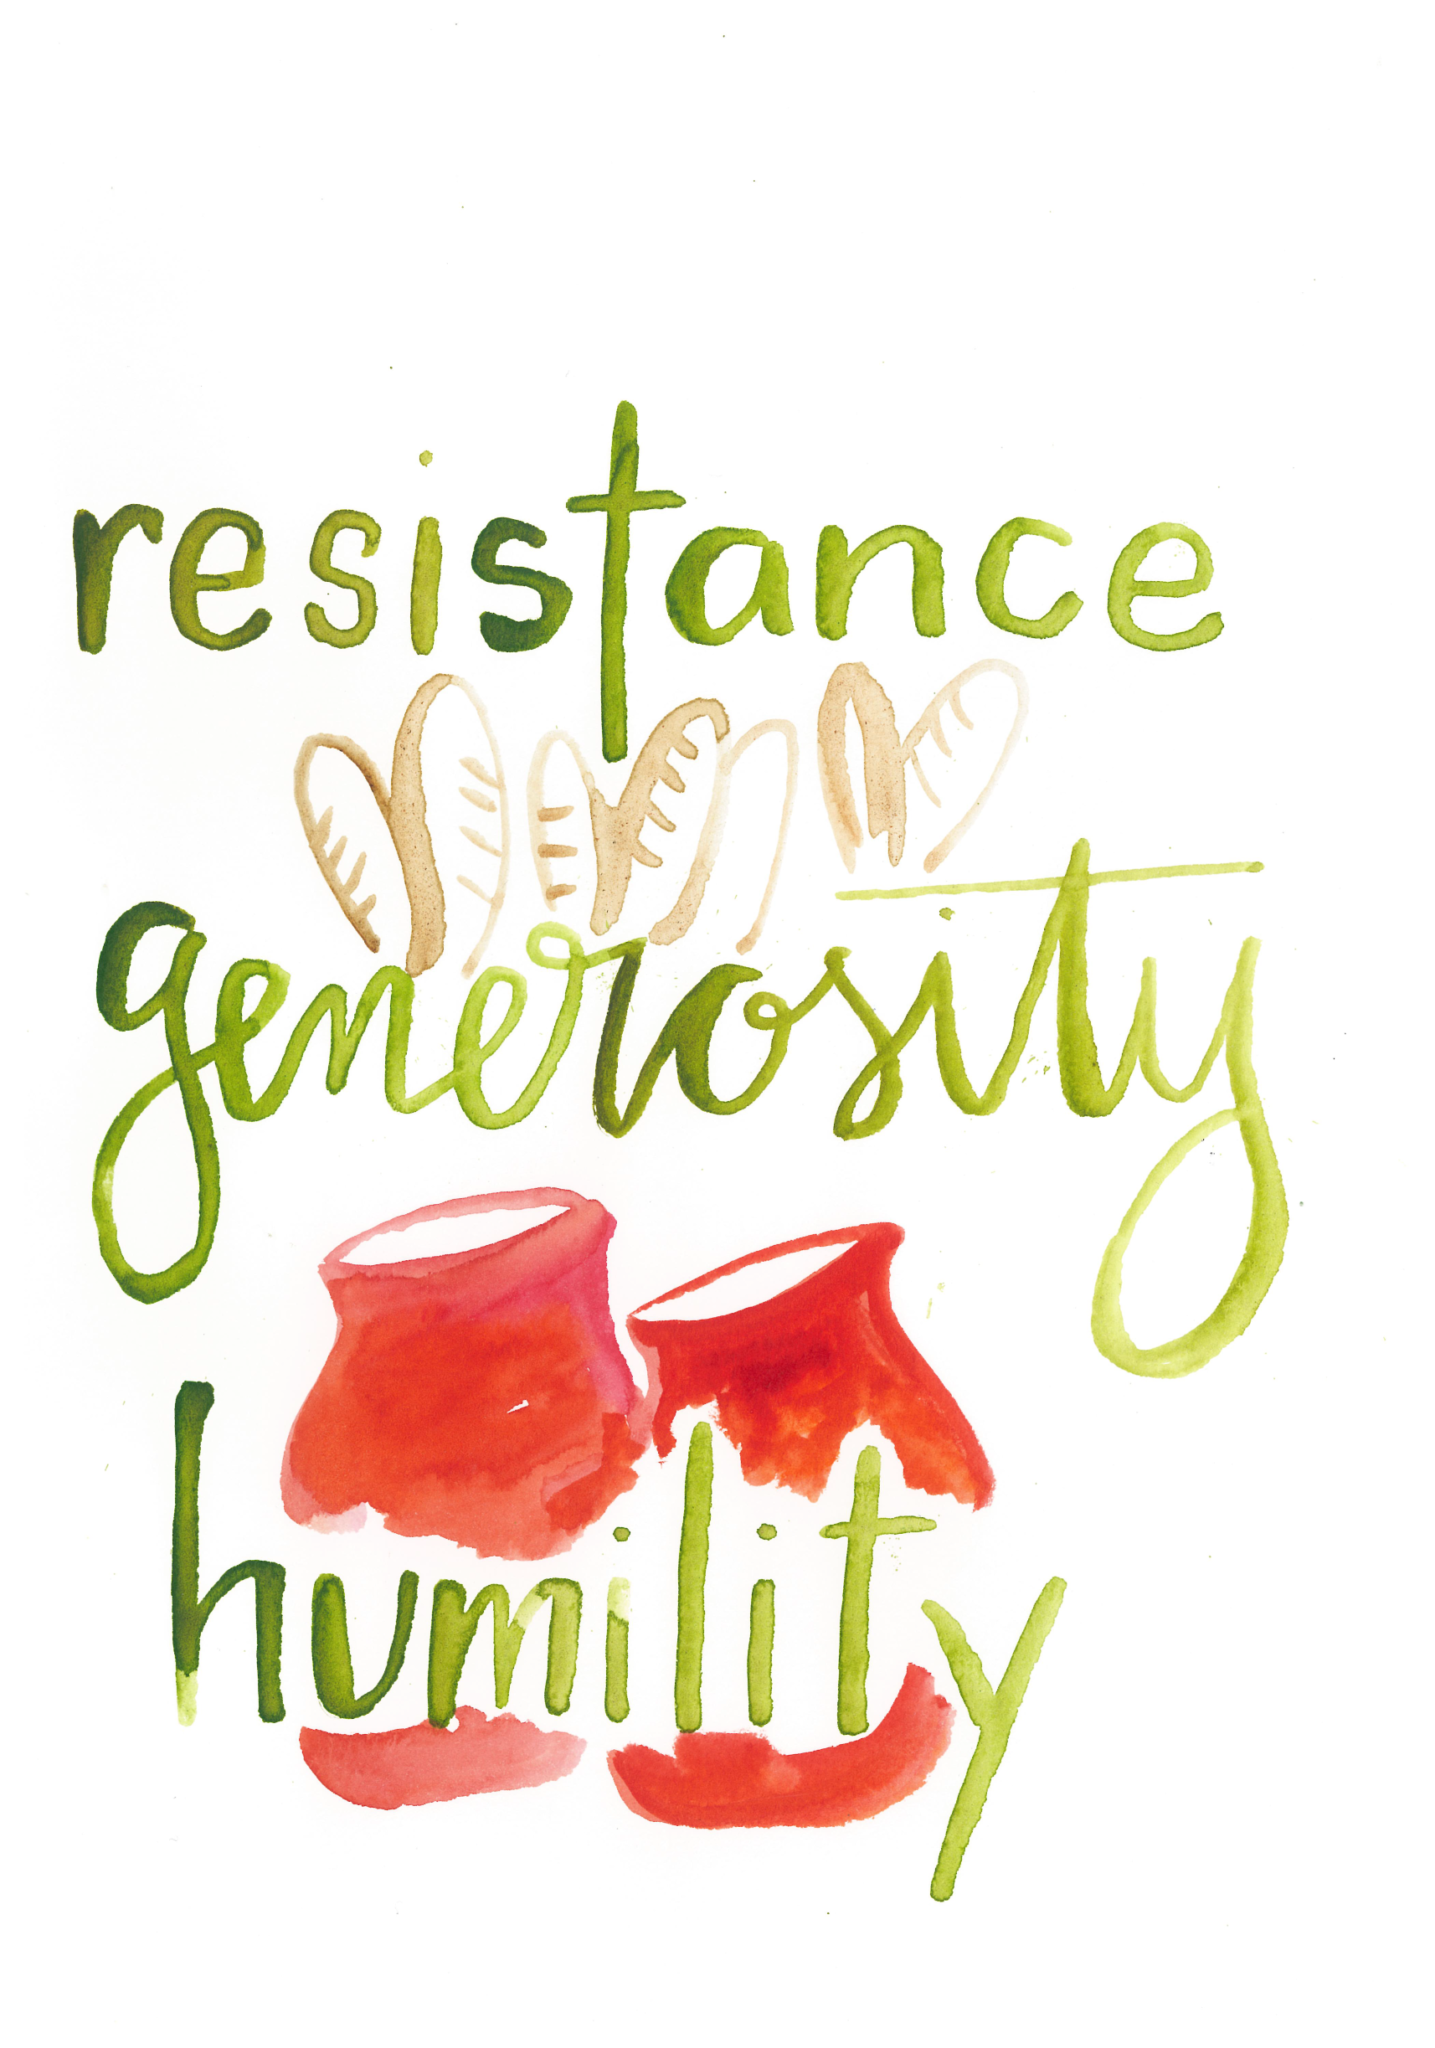 Abigail chapter art with words "resistance," "generosity," and "humility" and icons for bread and jugs